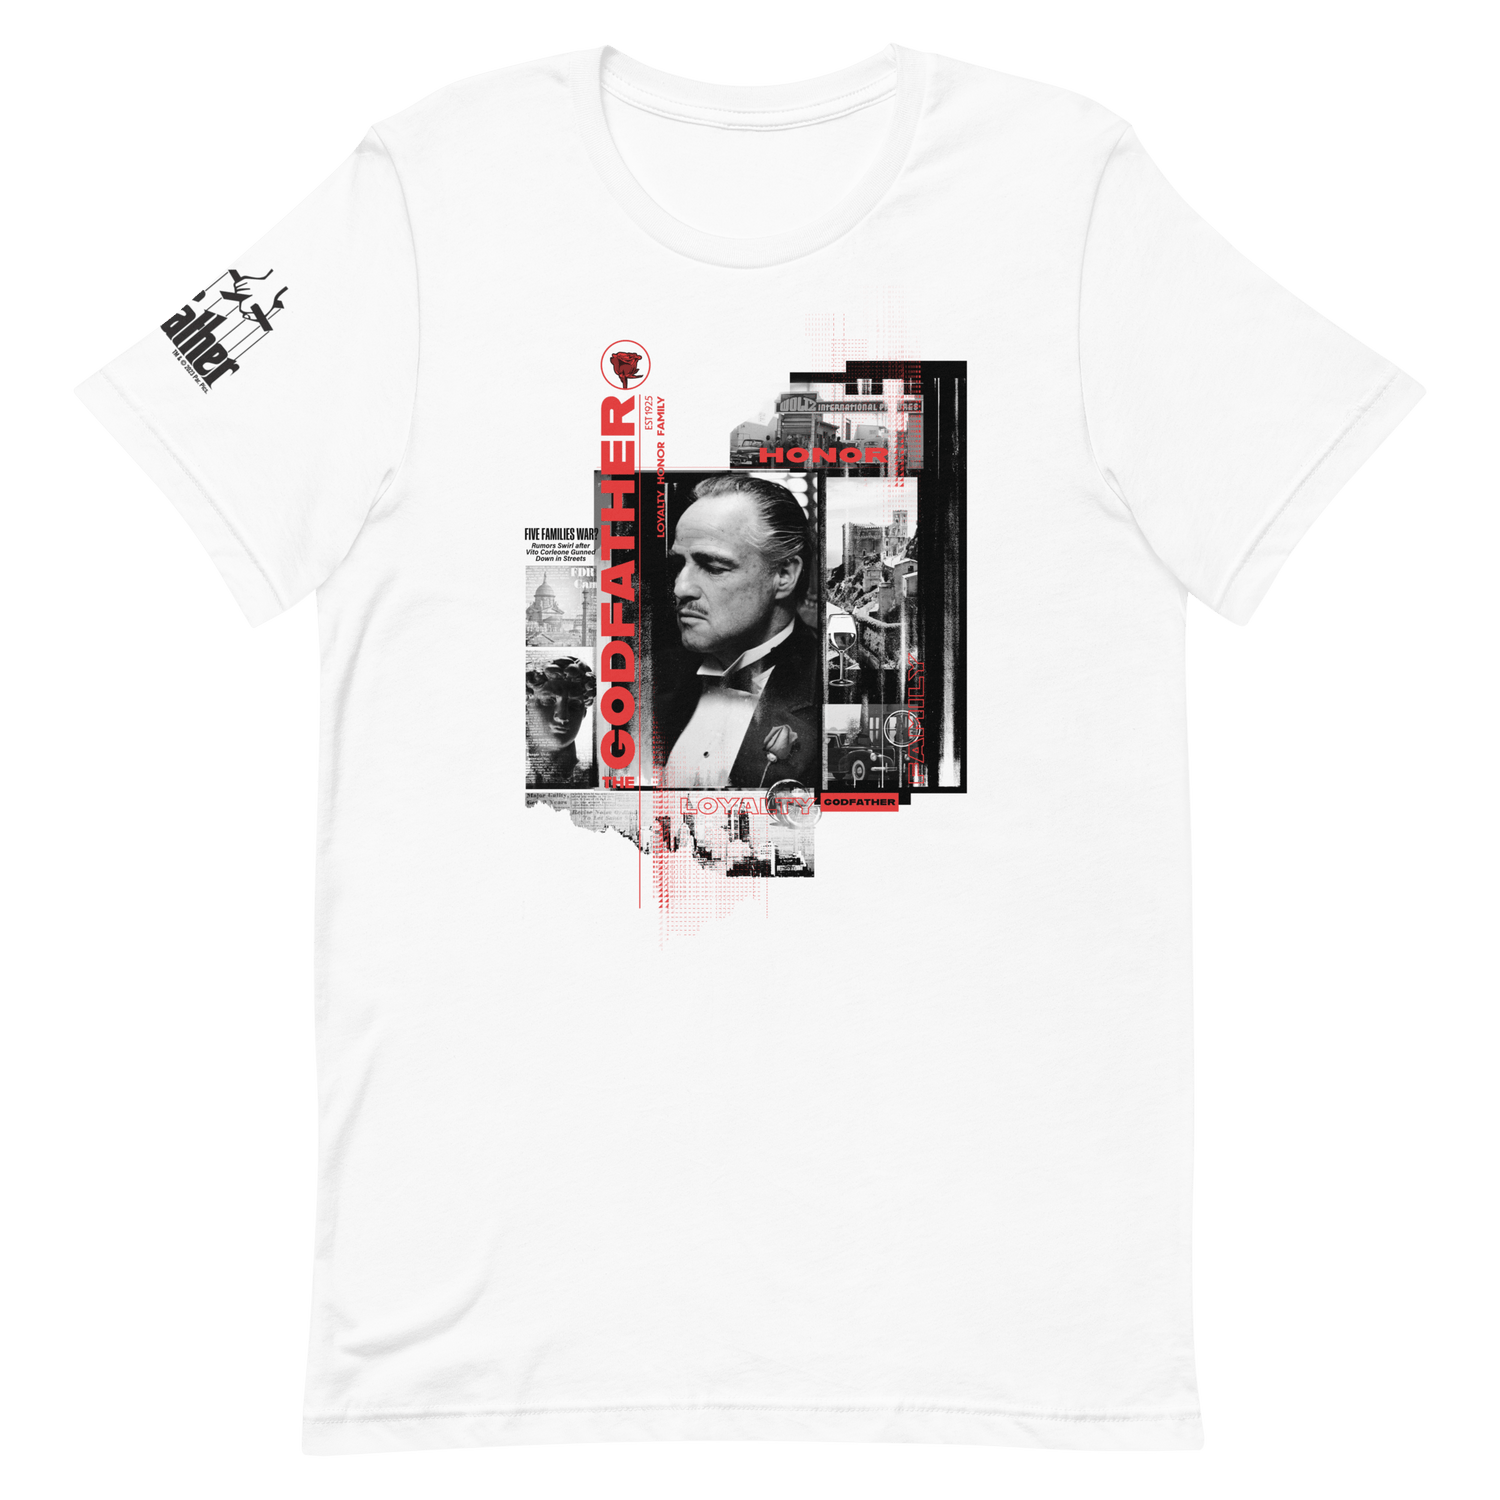 The Godfather "Honor Loyalty Family" Adult Short Sleeve T - Shirt - Paramount Shop